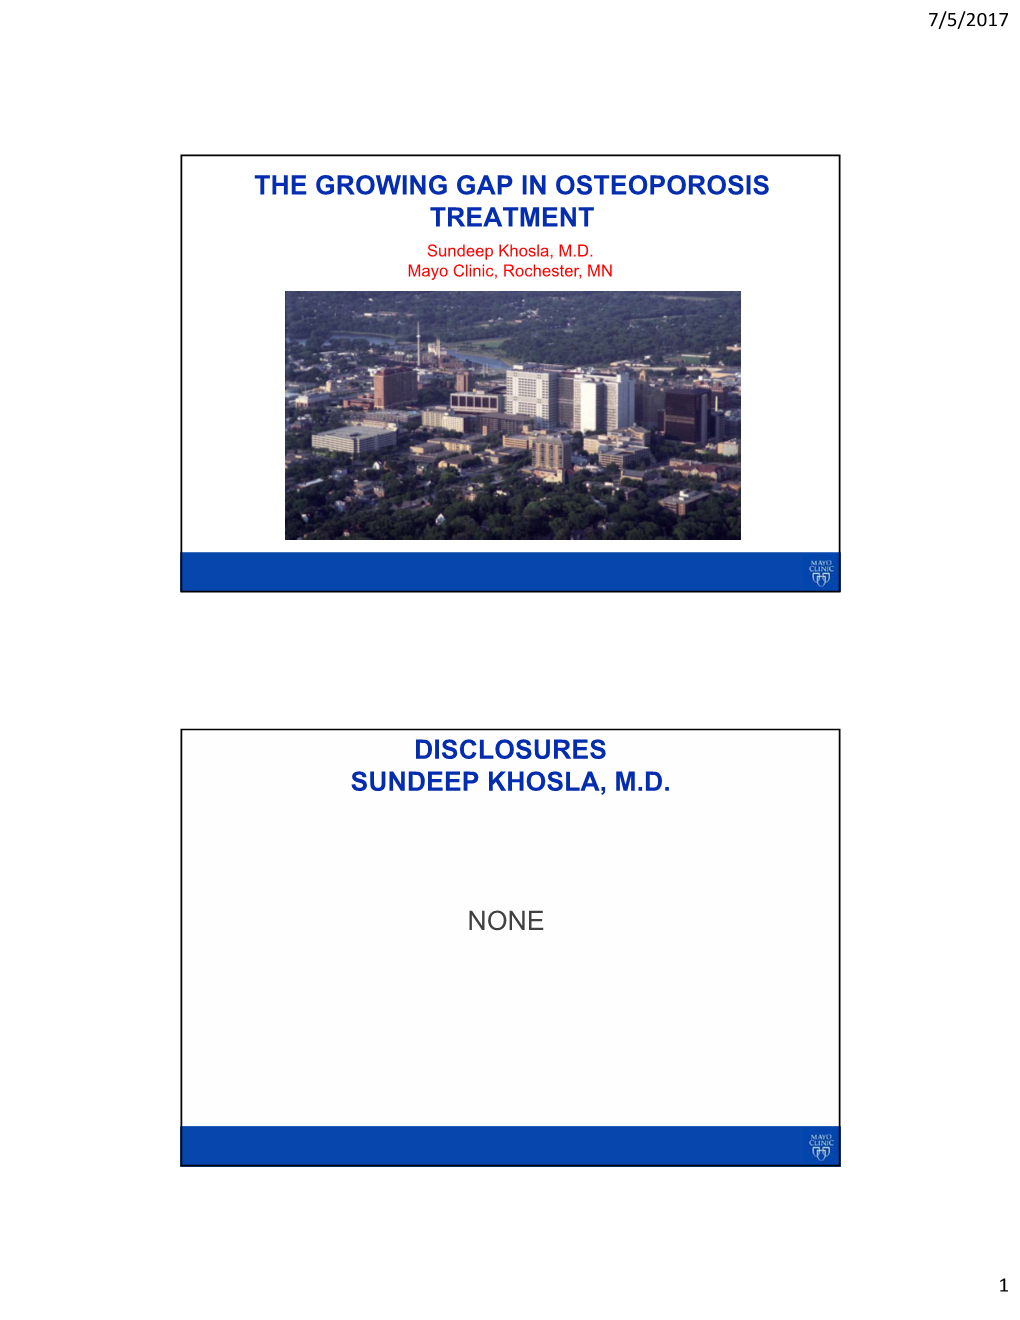 THE GROWING GAP in OSTEOPOROSIS TREATMENT Sundeep Khosla, M.D